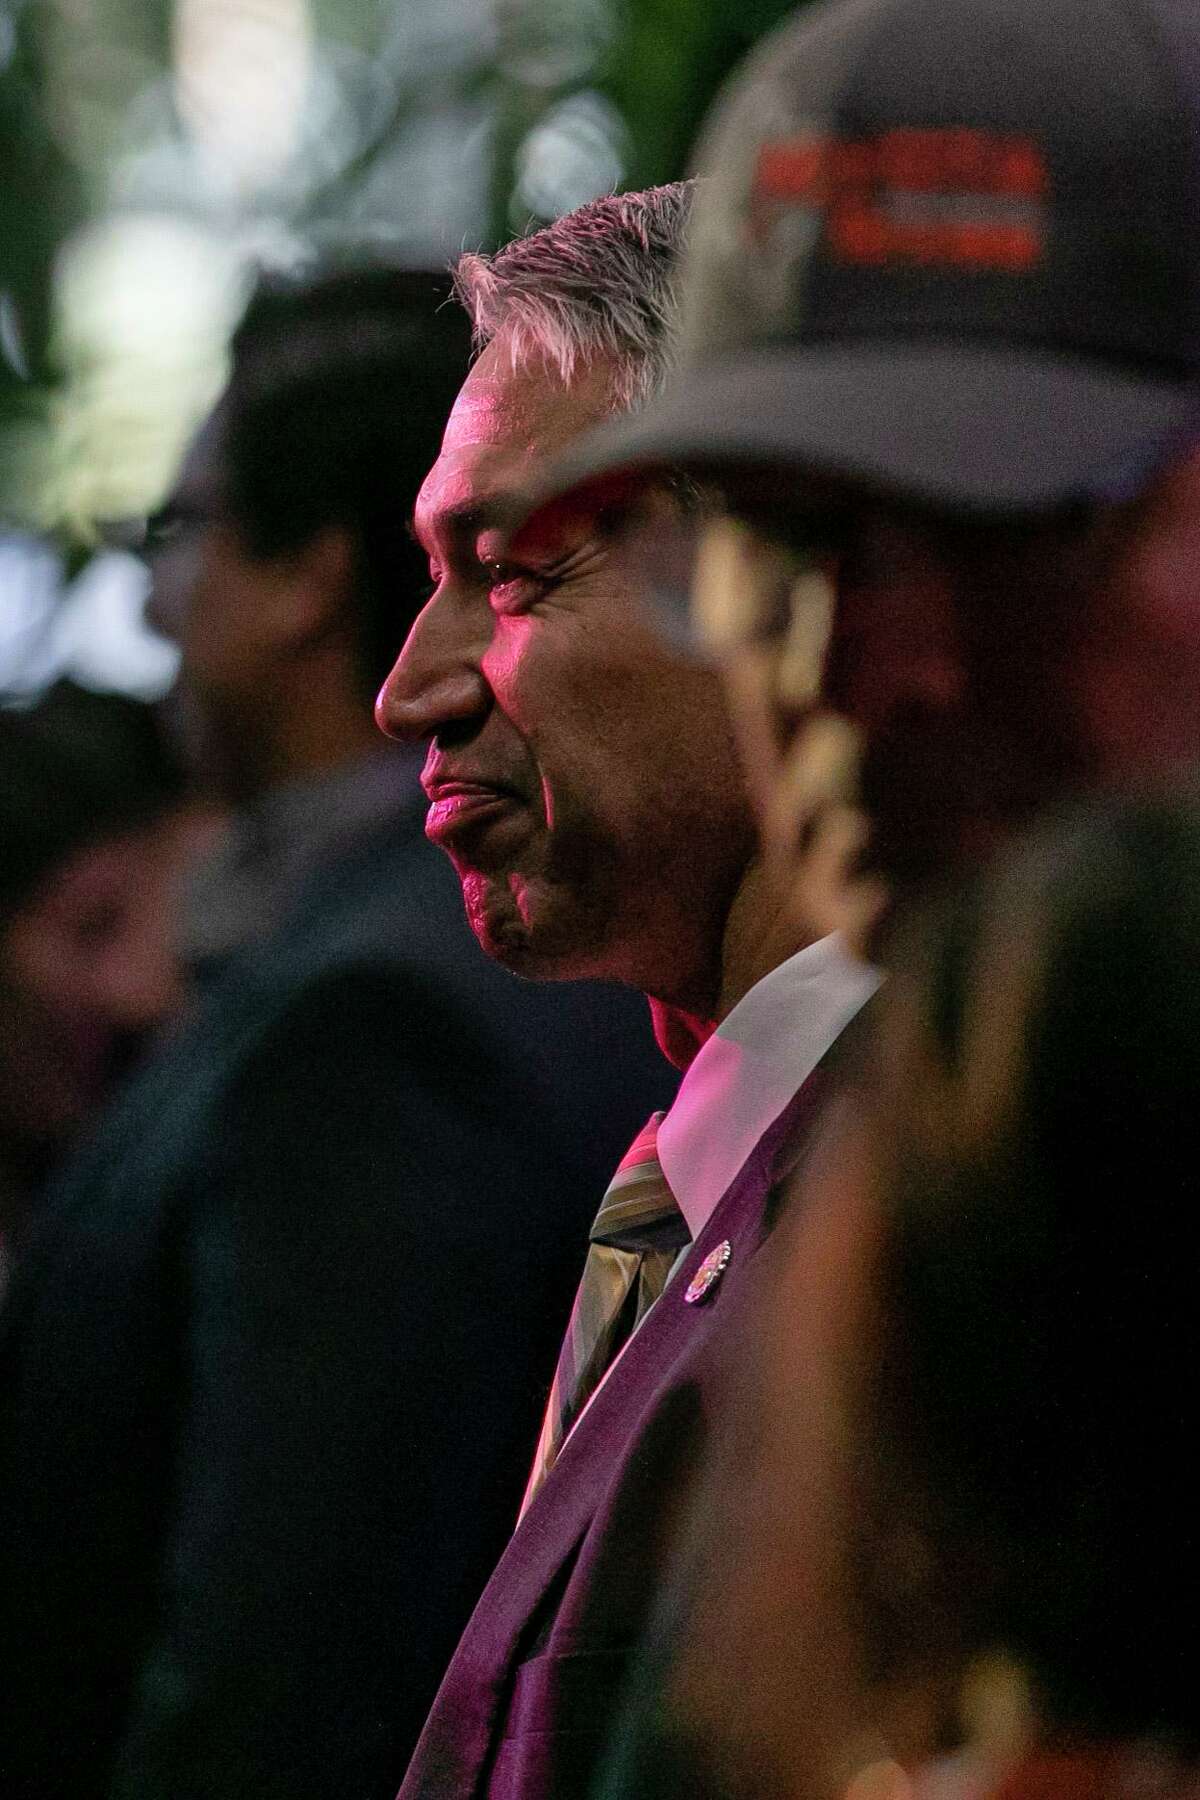 San Antonio Mayor Ron Nirenberg is seen during the Toyota’s line-off ceremony of their latest vehicle, the Sequoia, at Toyota Motor Manufacturing Texas in San Antonio in TX, on Sept. 21, 2022.